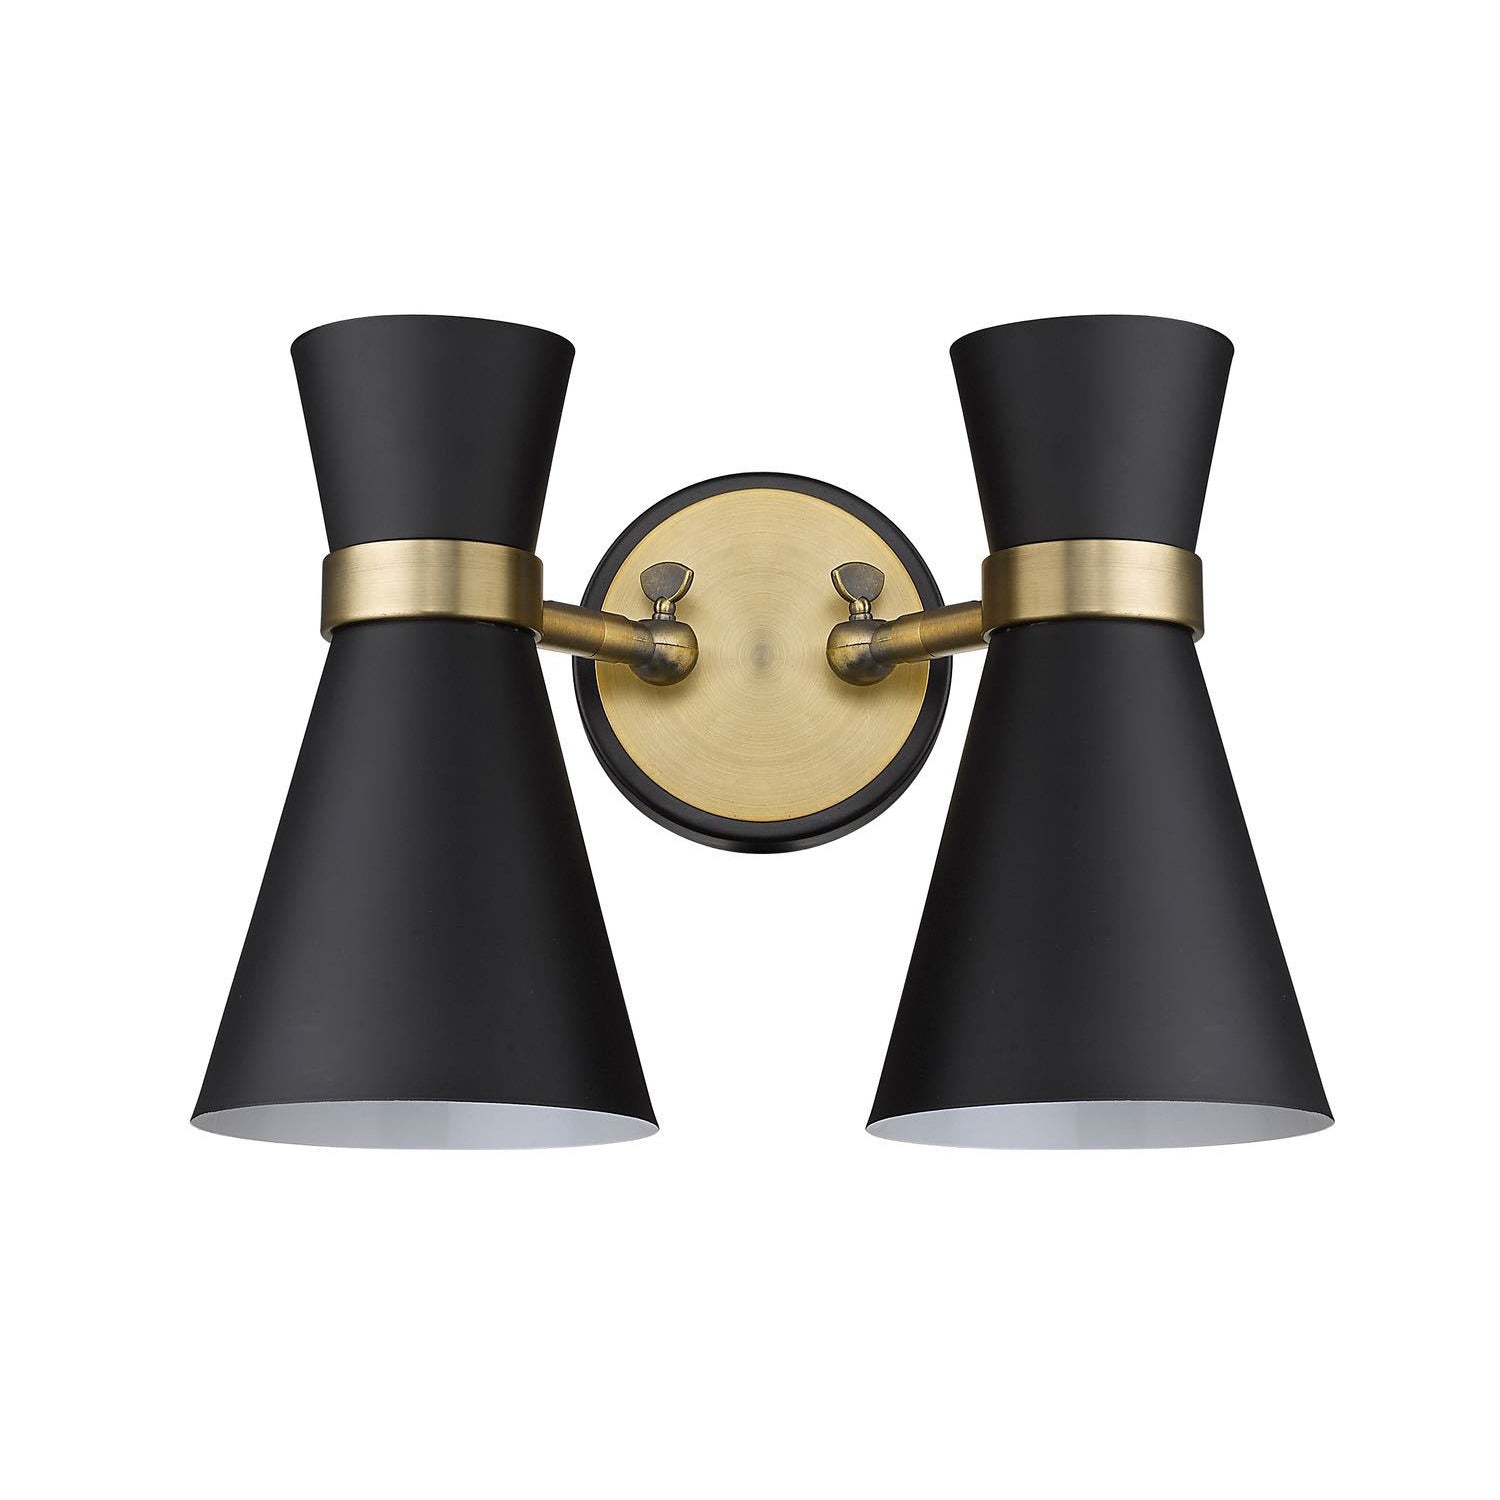 Soriano Wall Sconce Matte Black + Heritage Brass